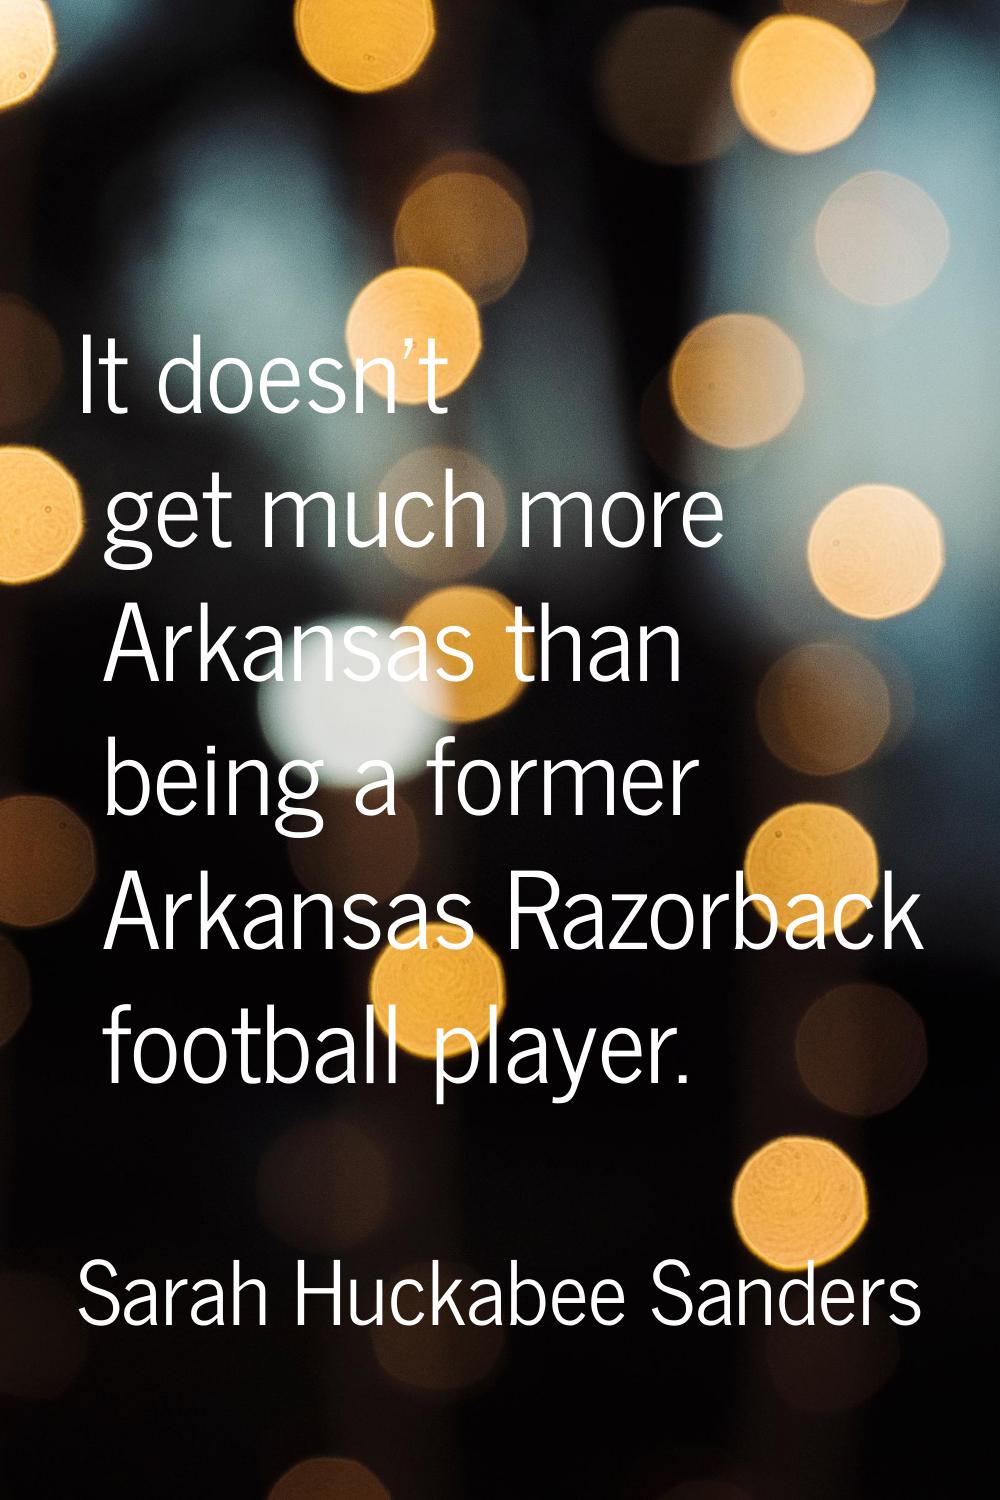 It doesn't get much more Arkansas than being a former Arkansas Razorback football player.